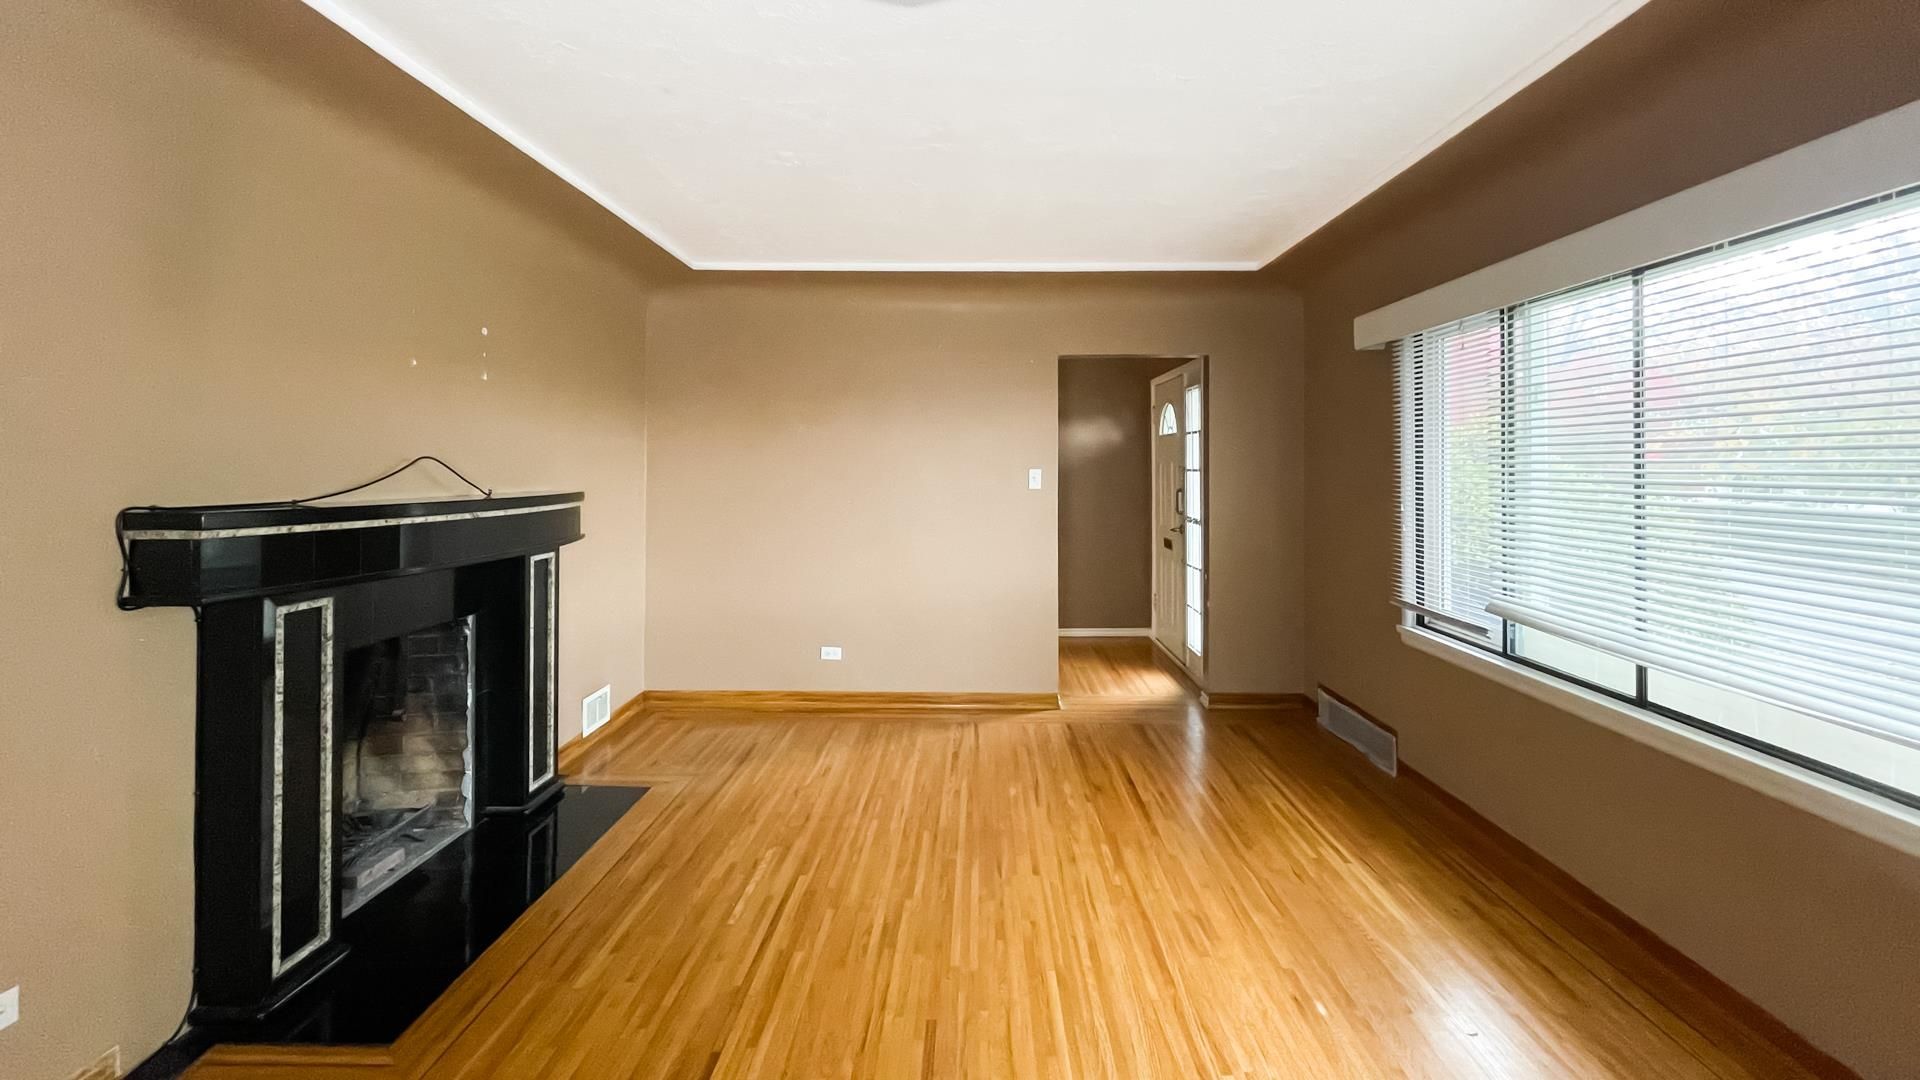 Photo 5: Photos: 4557 PARKER Street in Burnaby: Brentwood Park House for sale (Burnaby North)  : MLS®# R2626378